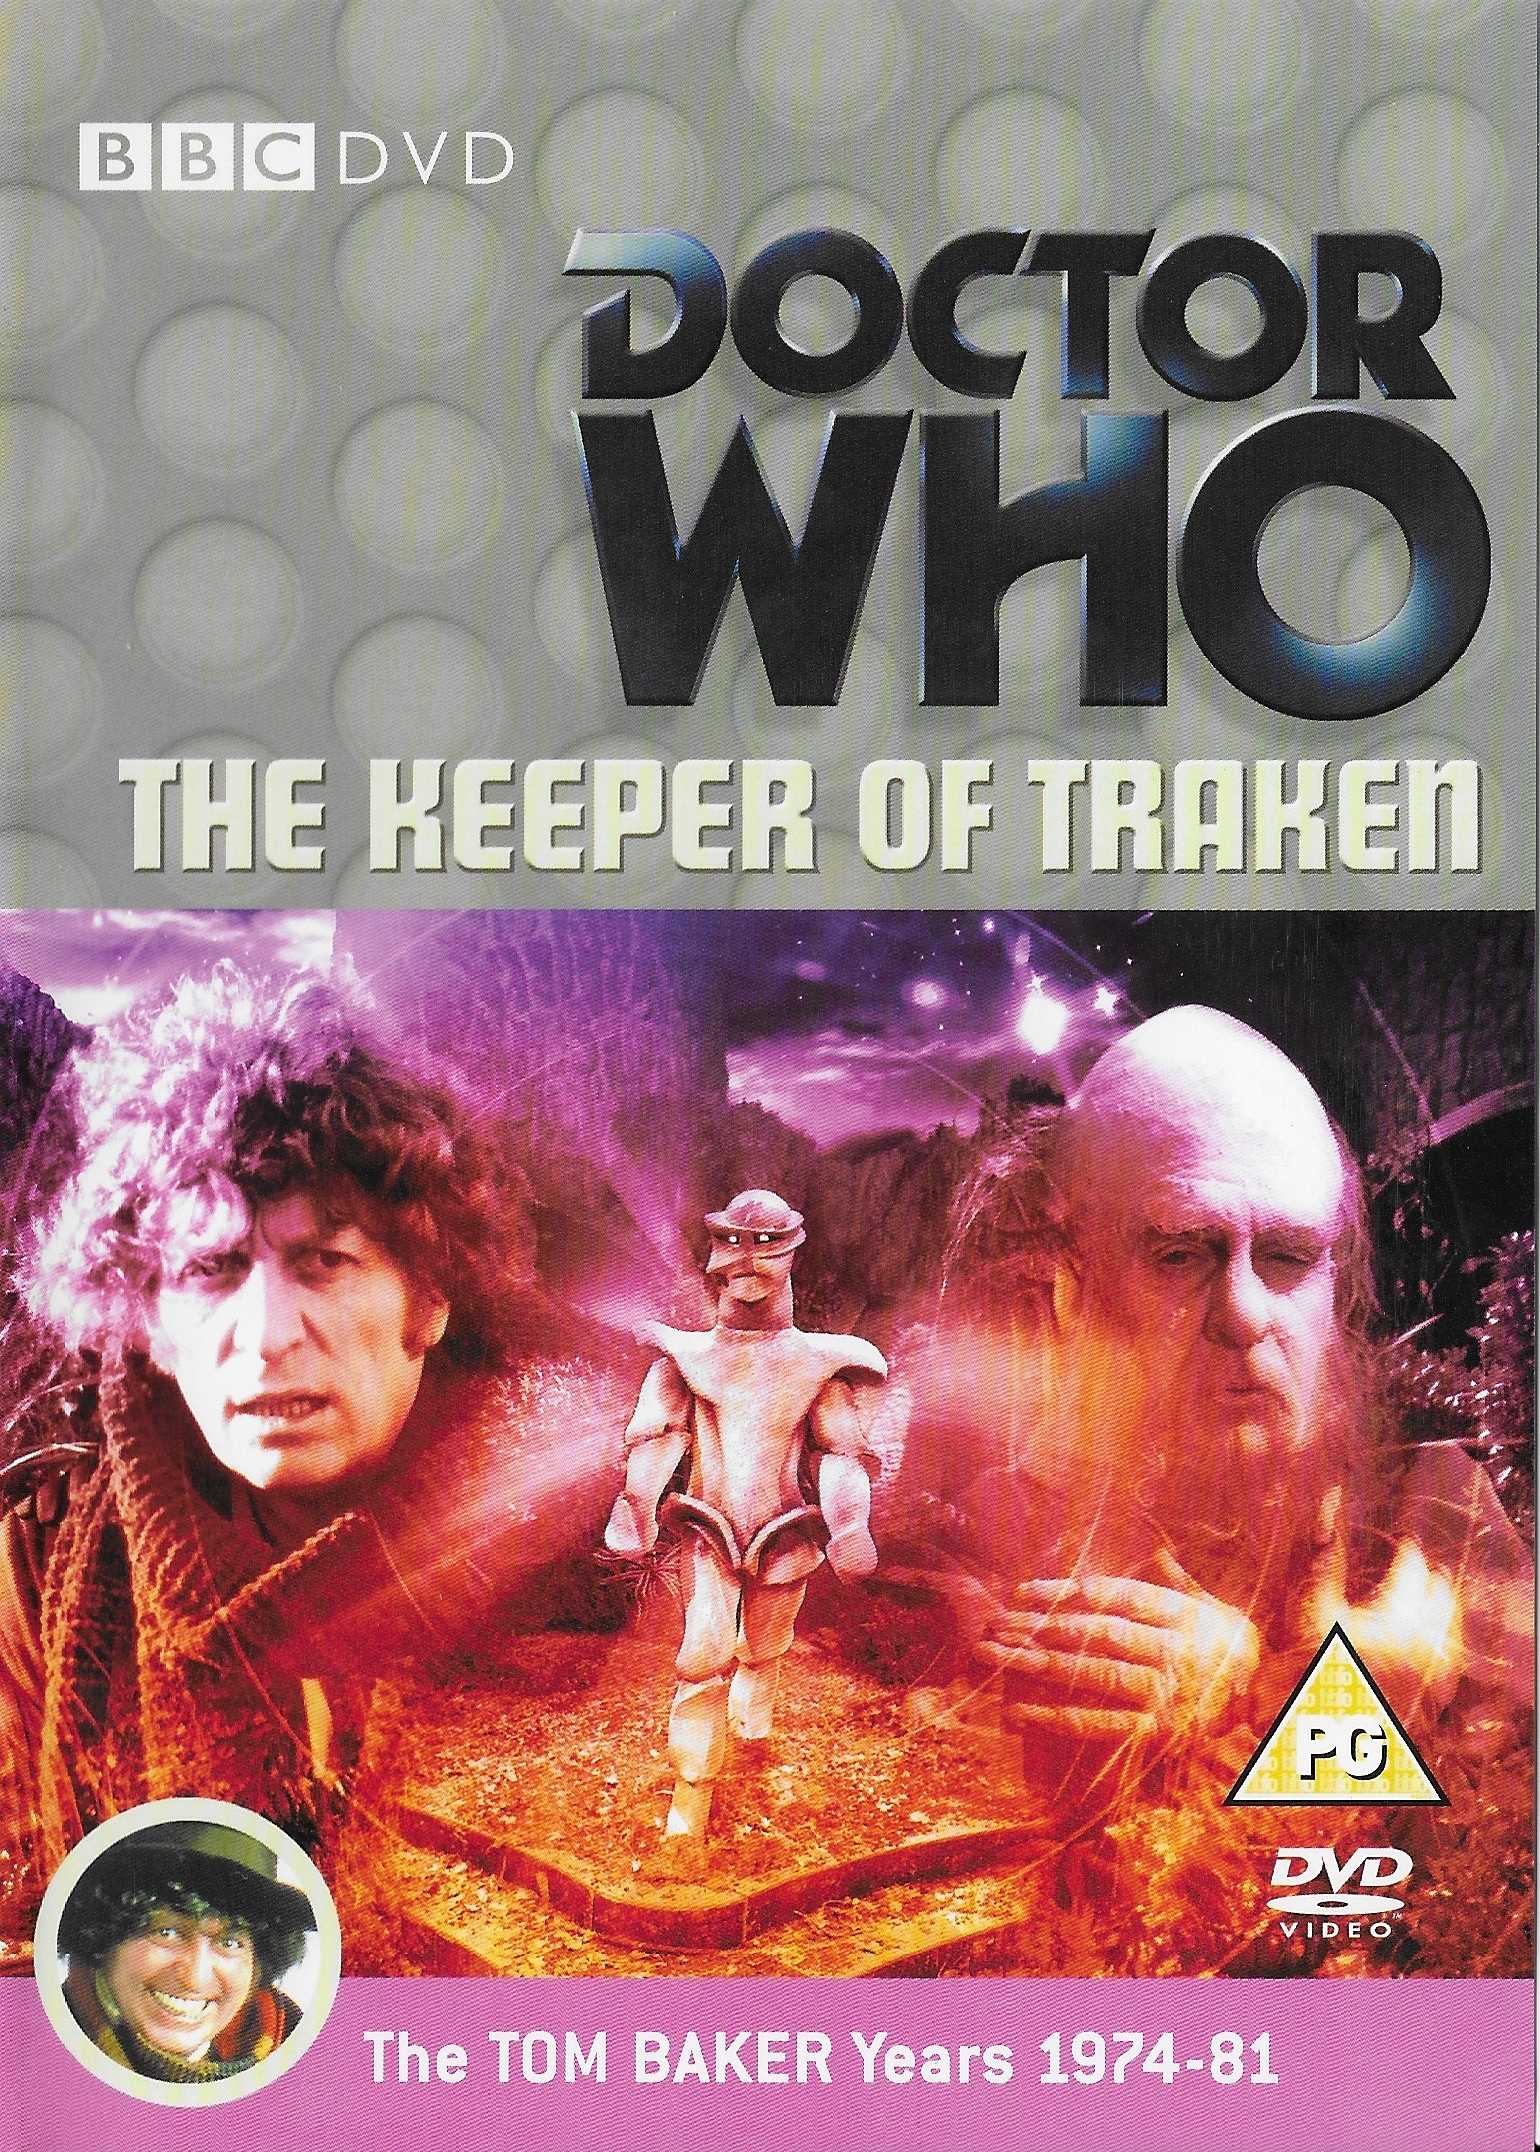 Picture of BBCDVD 1331A Doctor Who - The keeper of Tracken by artist Johnny Byrne from the BBC dvds - Records and Tapes library